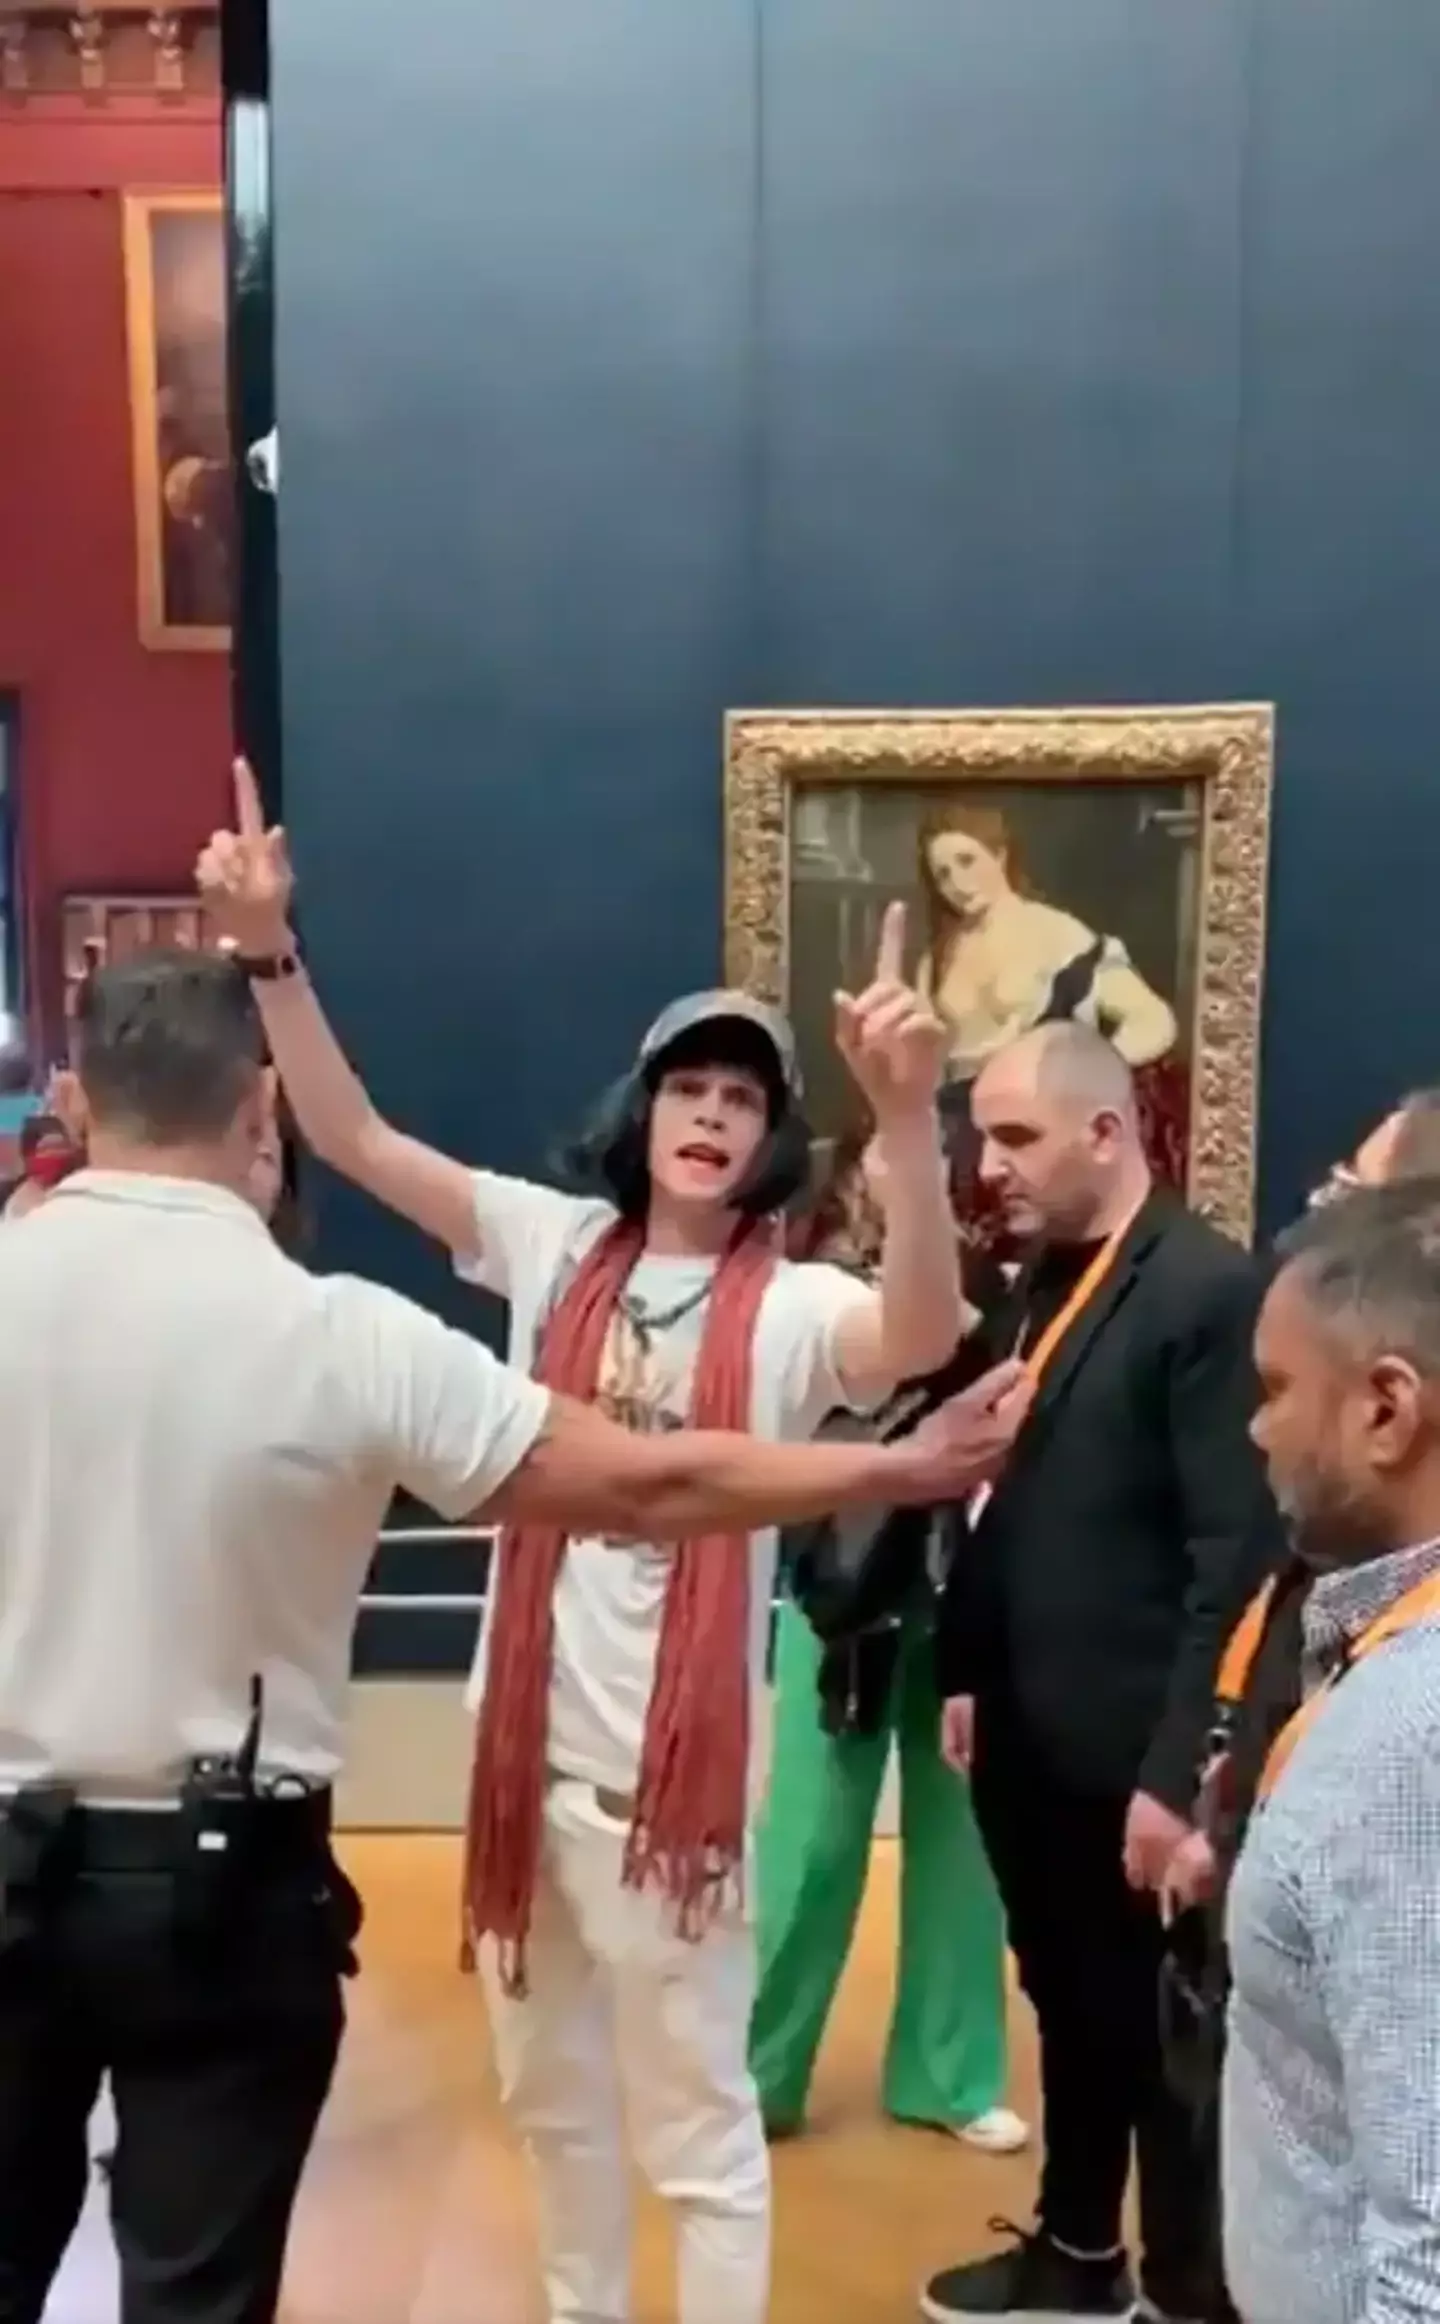 And this year, a man decided to hurl cake at the painting before being led away by security.